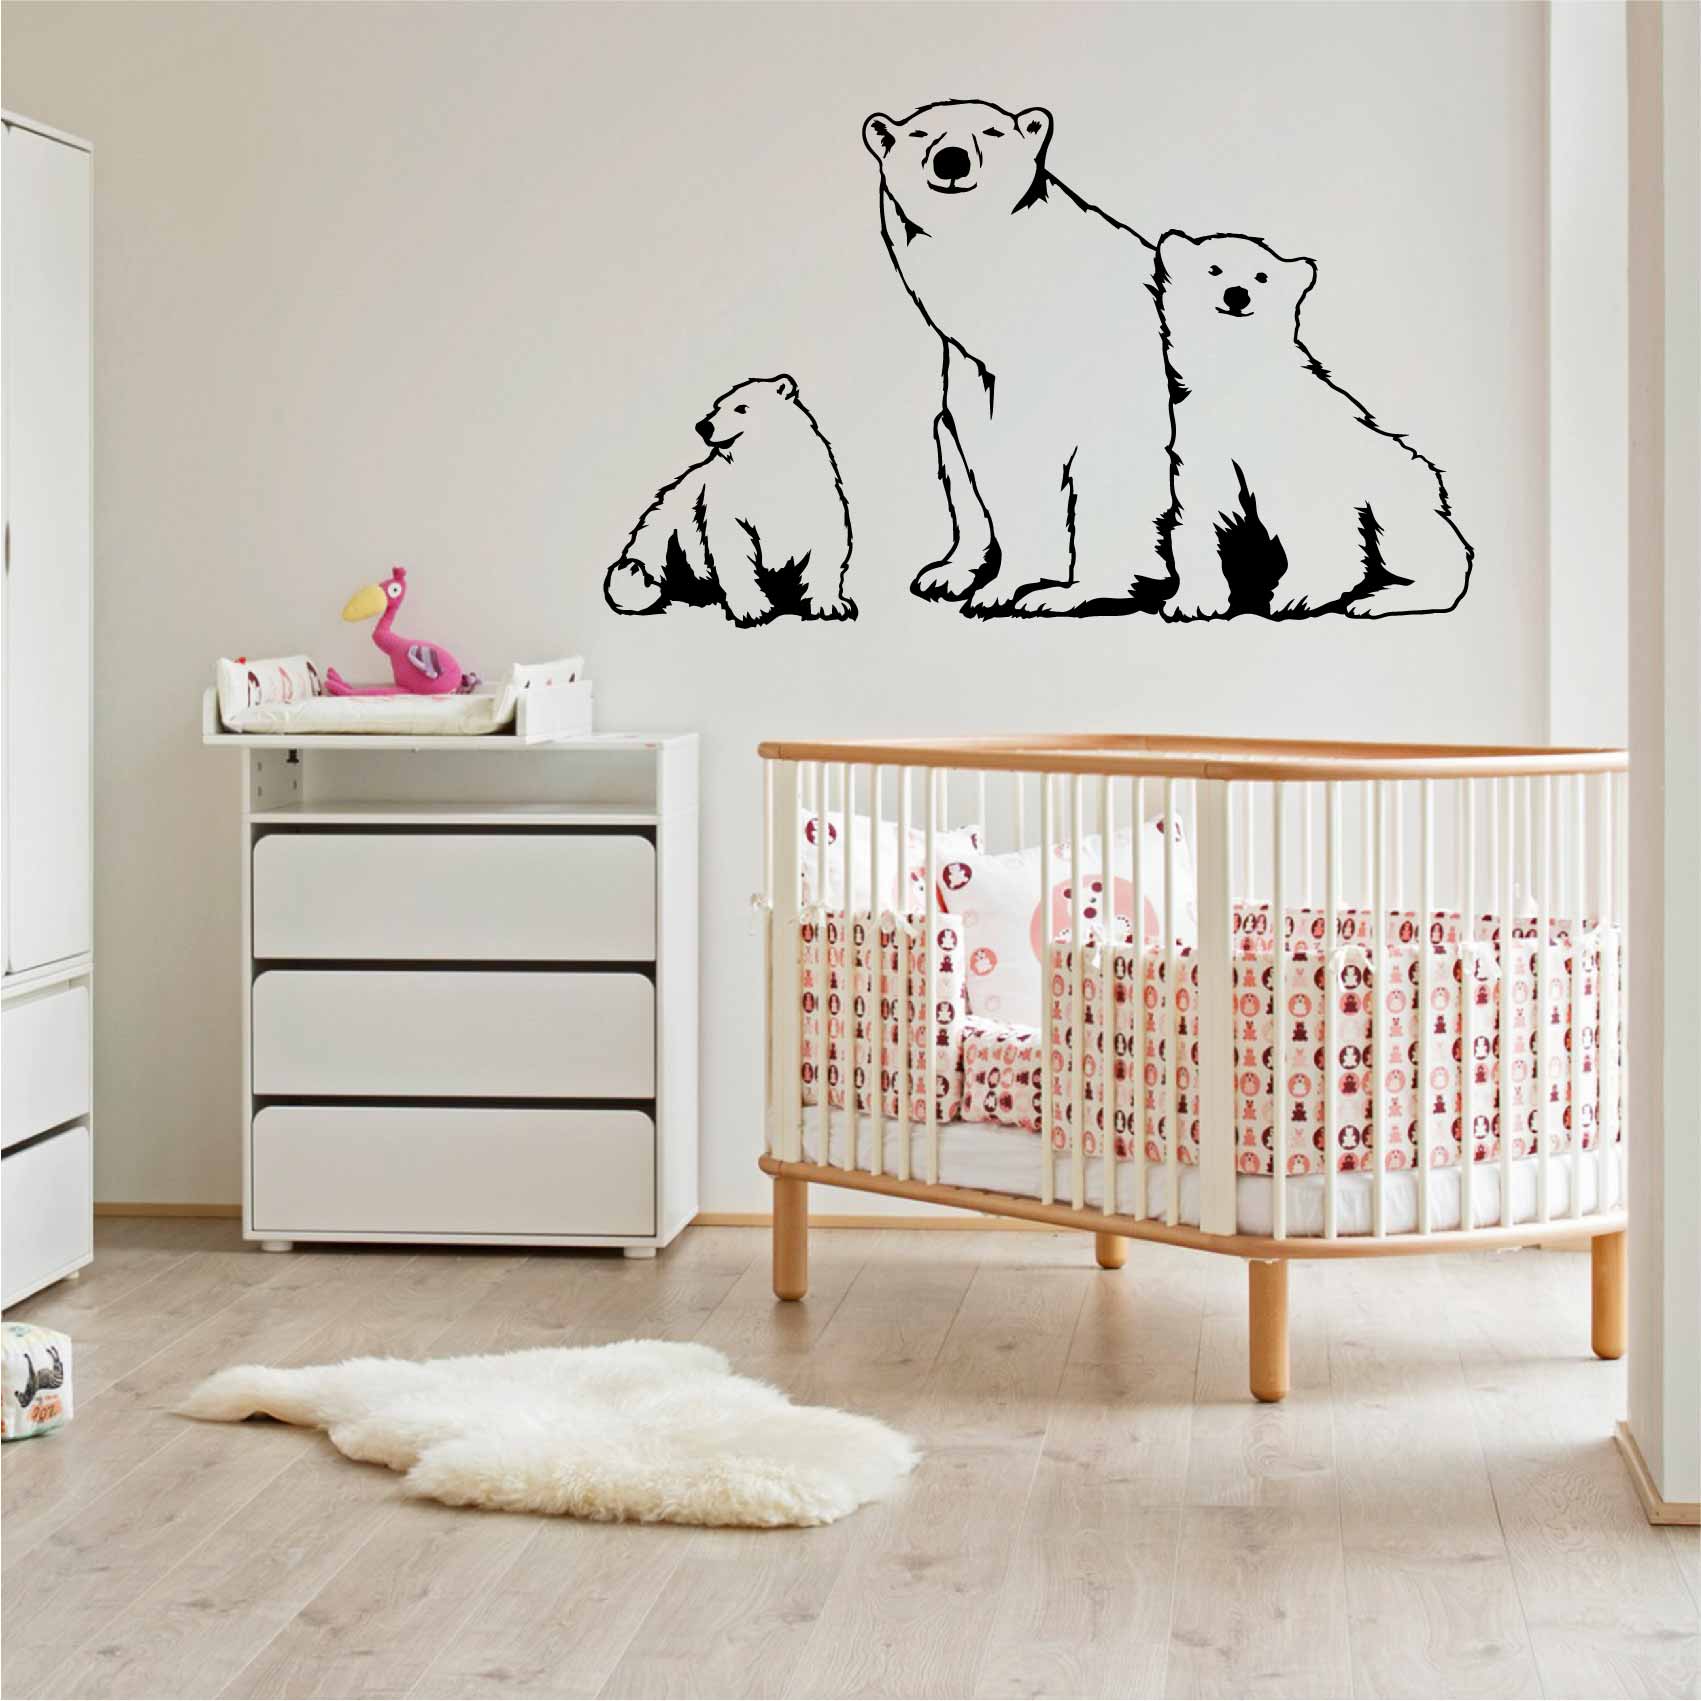 stickers-famille-ours-ref1ours-stickers-muraux-ours-autocollant-chambre-salon-deco-sticker-mural-ours-animaux